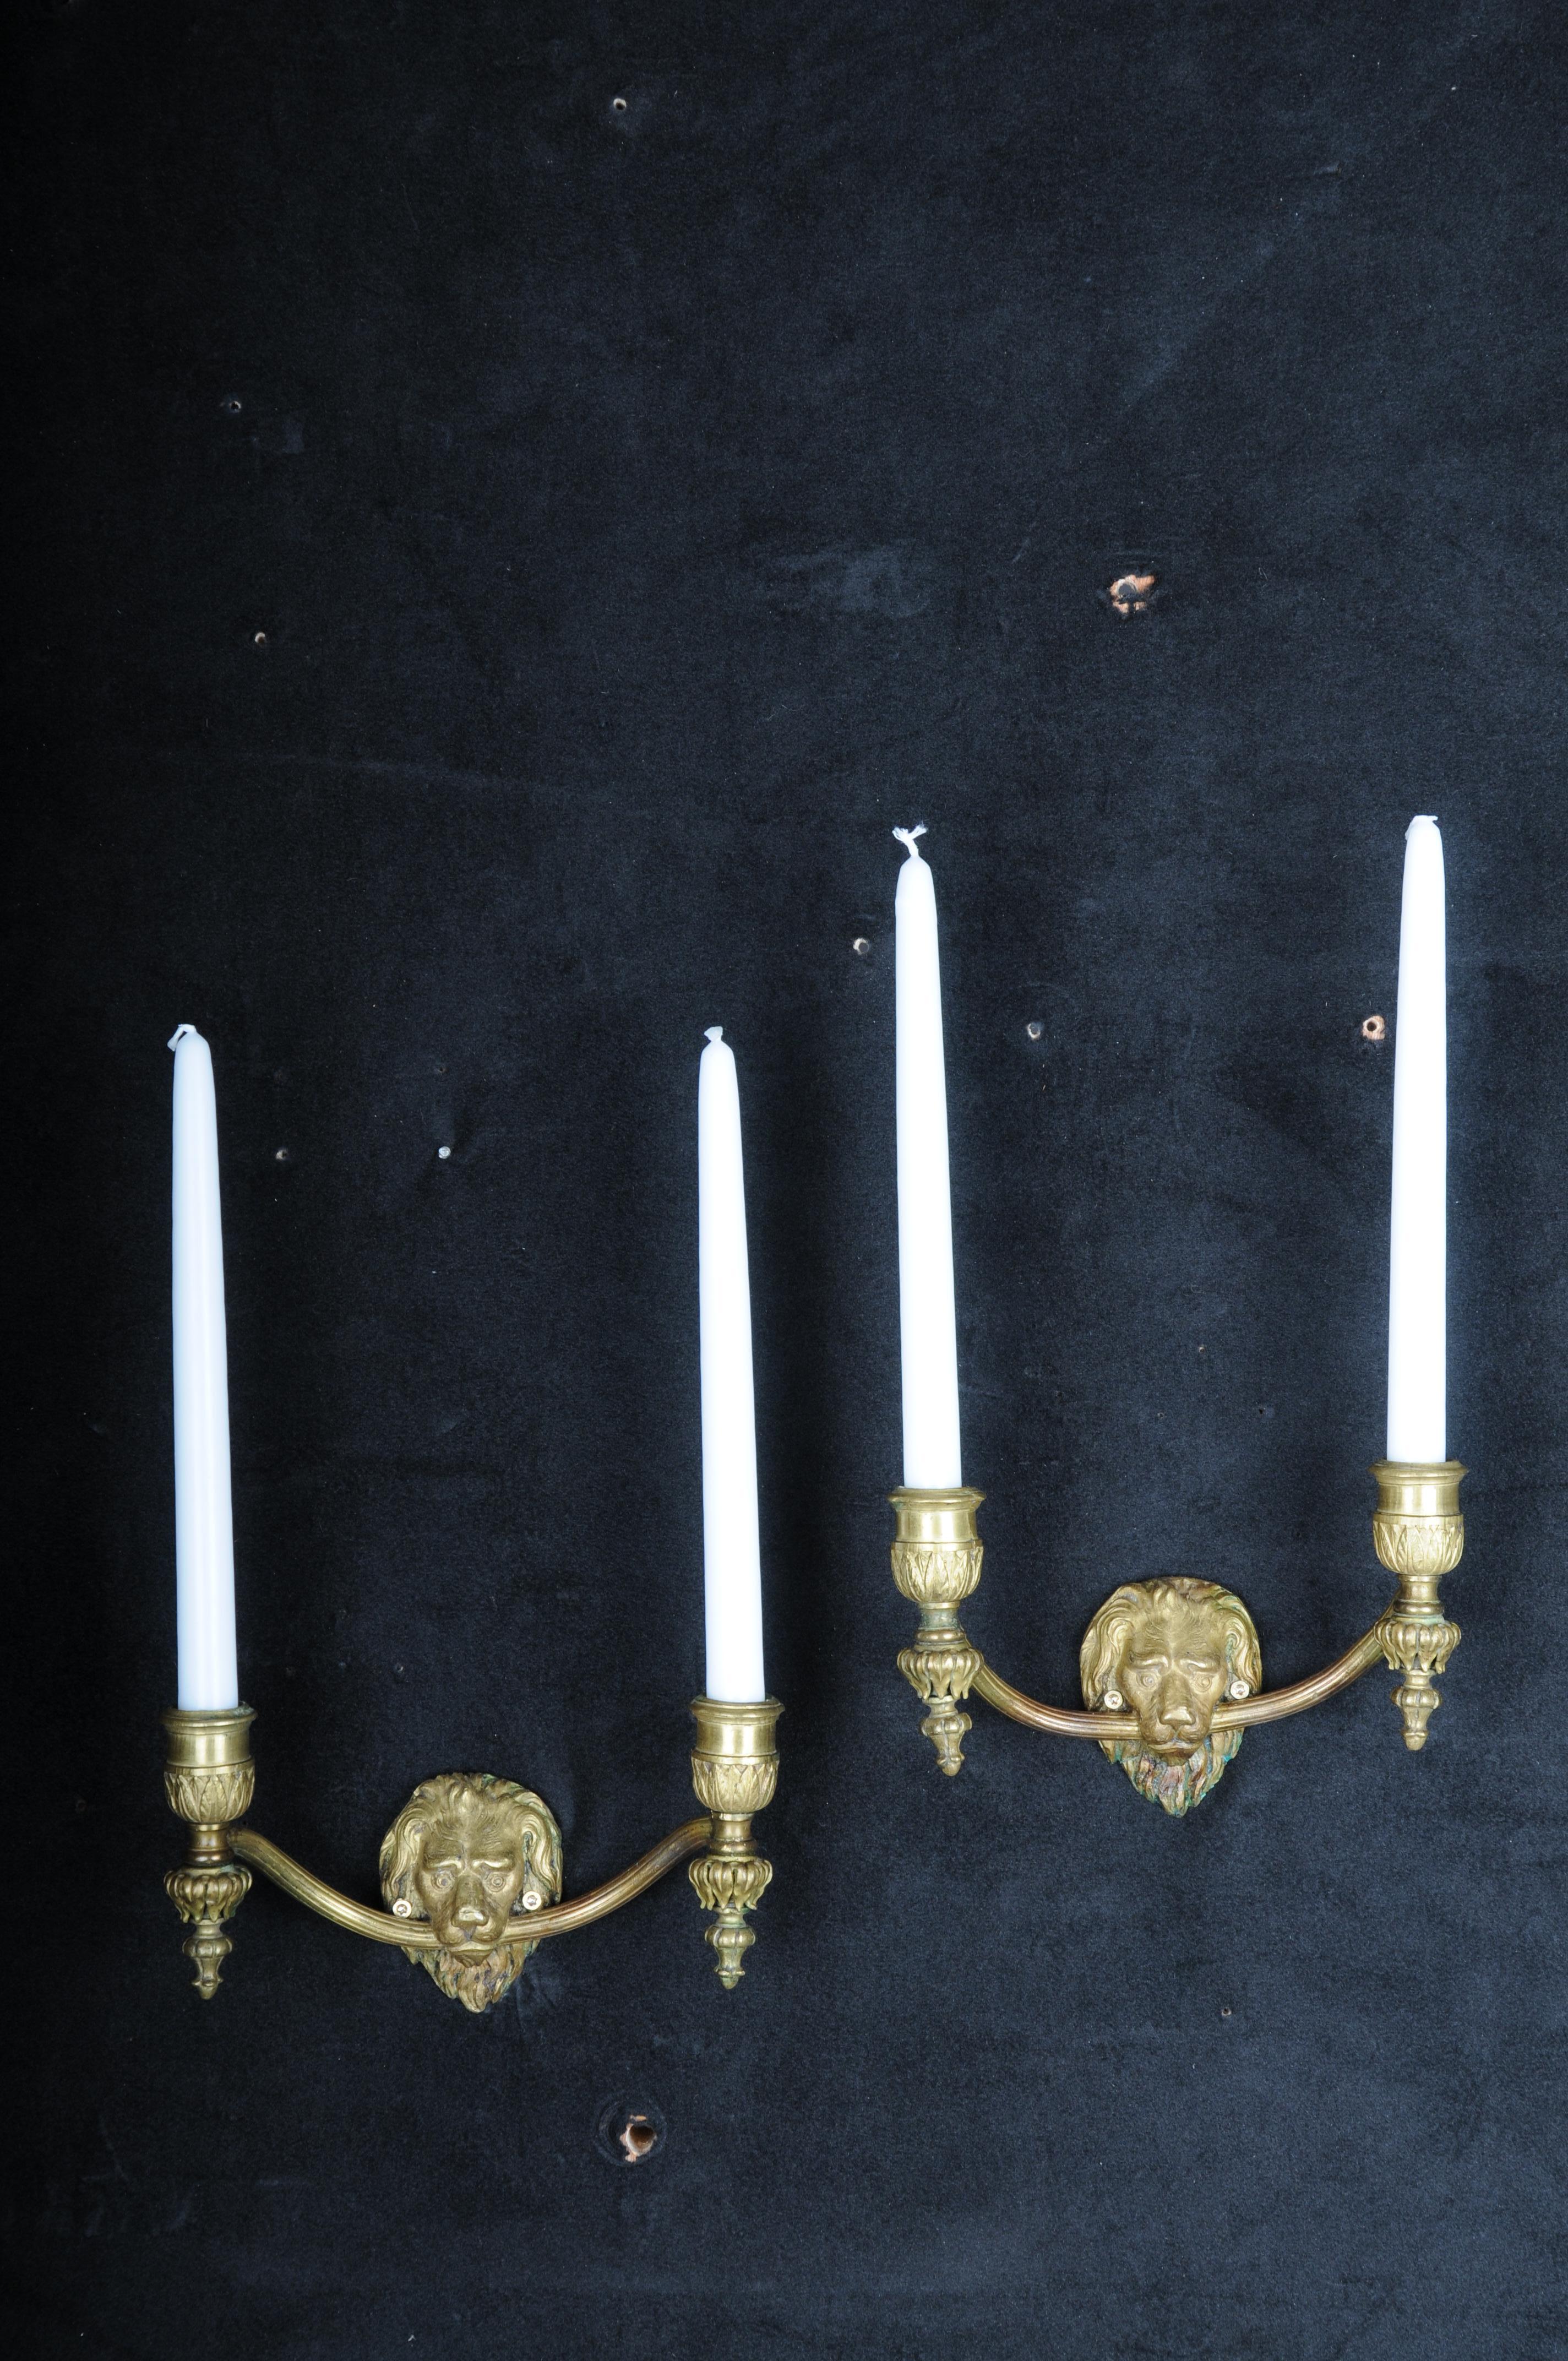 20th Century lion wall sconce/wall candlestick, brass, gold

Wall sconces each with two long curved candle light arms. Fluted spouts. A lion's head in the middle

Electrified and operational.